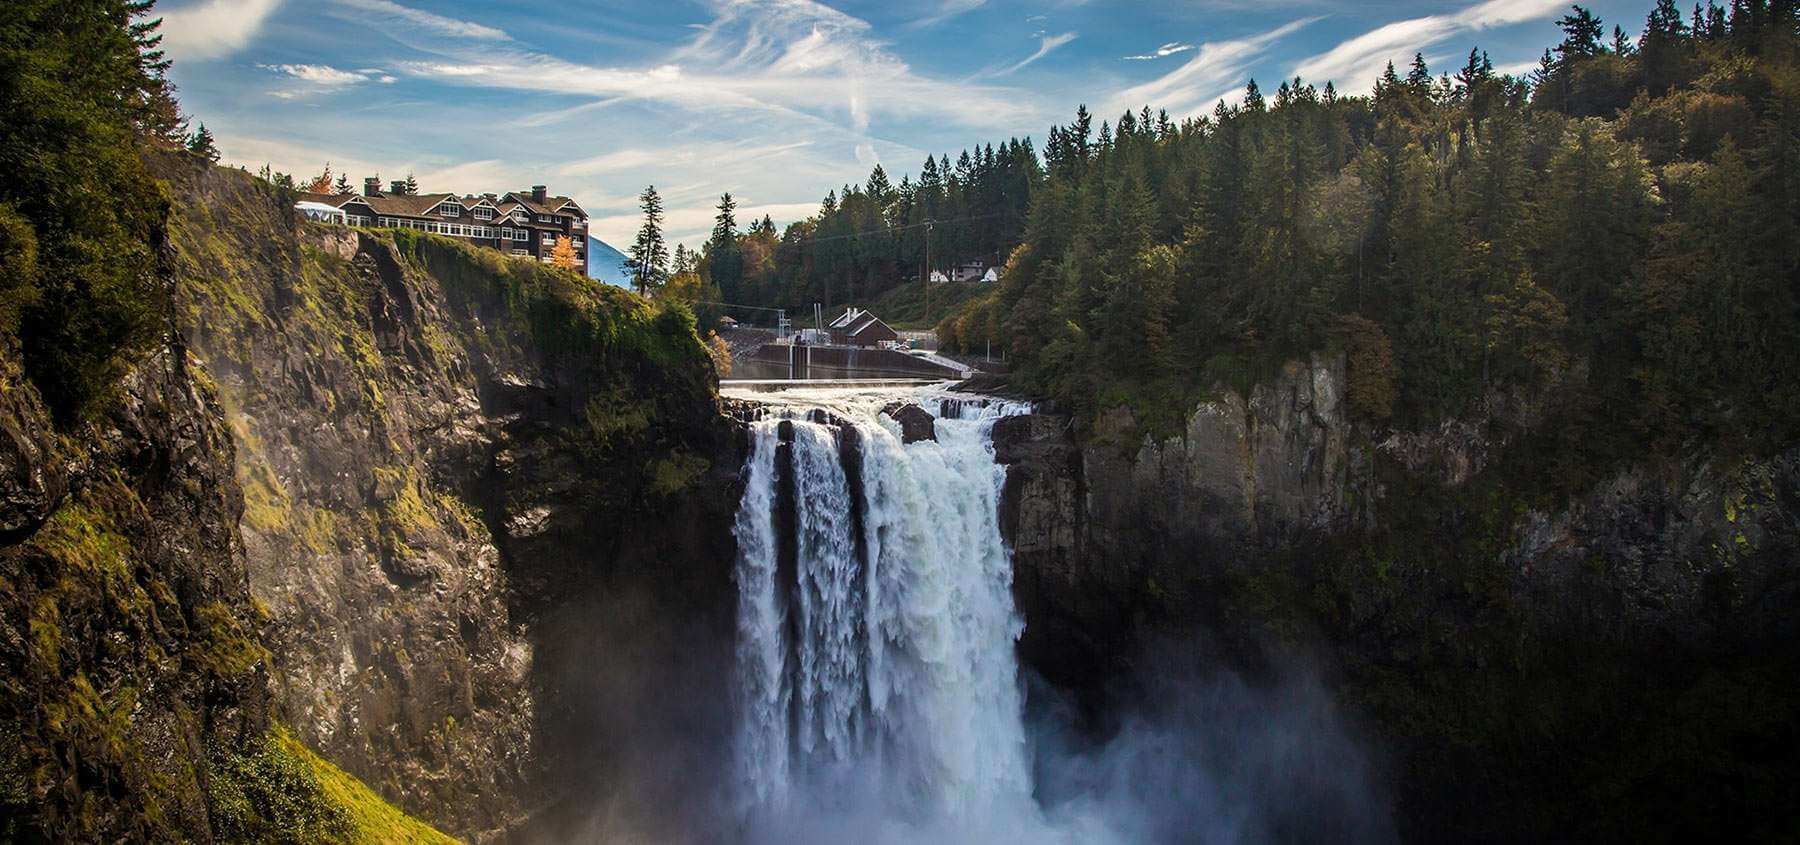 A hotel sits above Snoqualmie Falls, one of the most well-known waterfalls in Washington State.